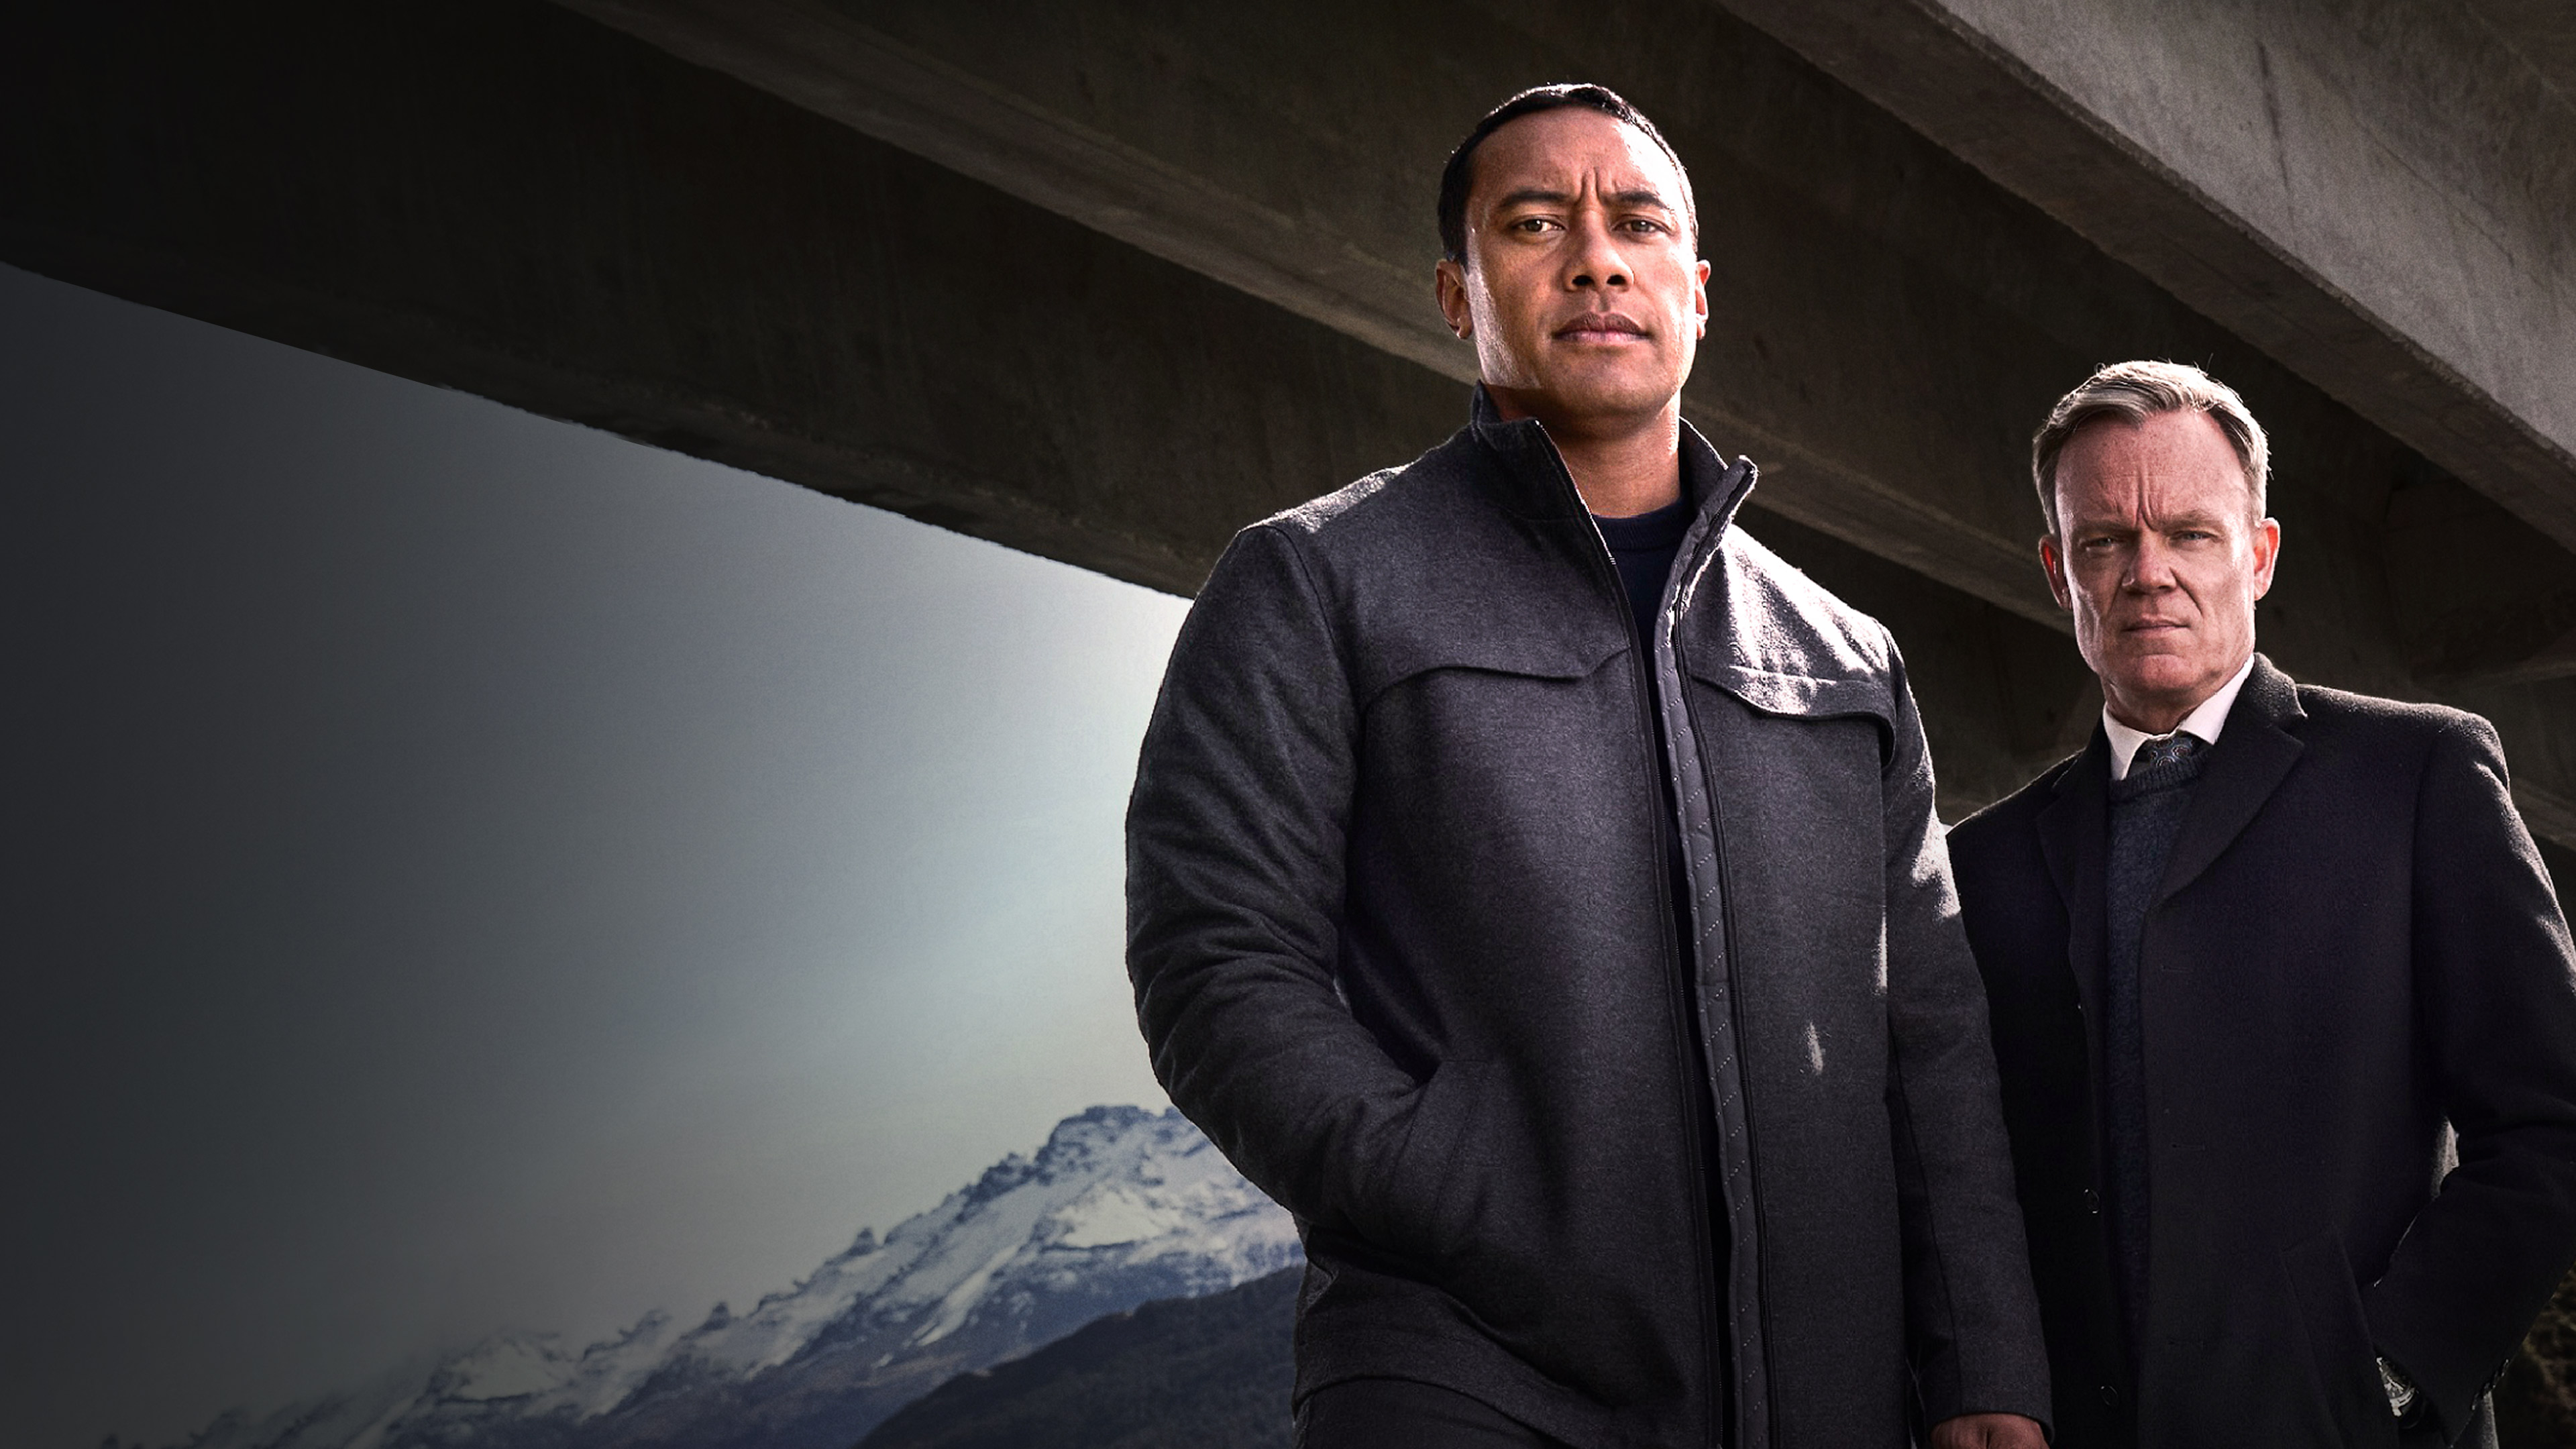 One Lane Bridge Trailer, In this dark crime drama with a supernatural edge, a Māori detective reawakens his second sight while investigating the death of a man on a mysterious one-lane bridge. 